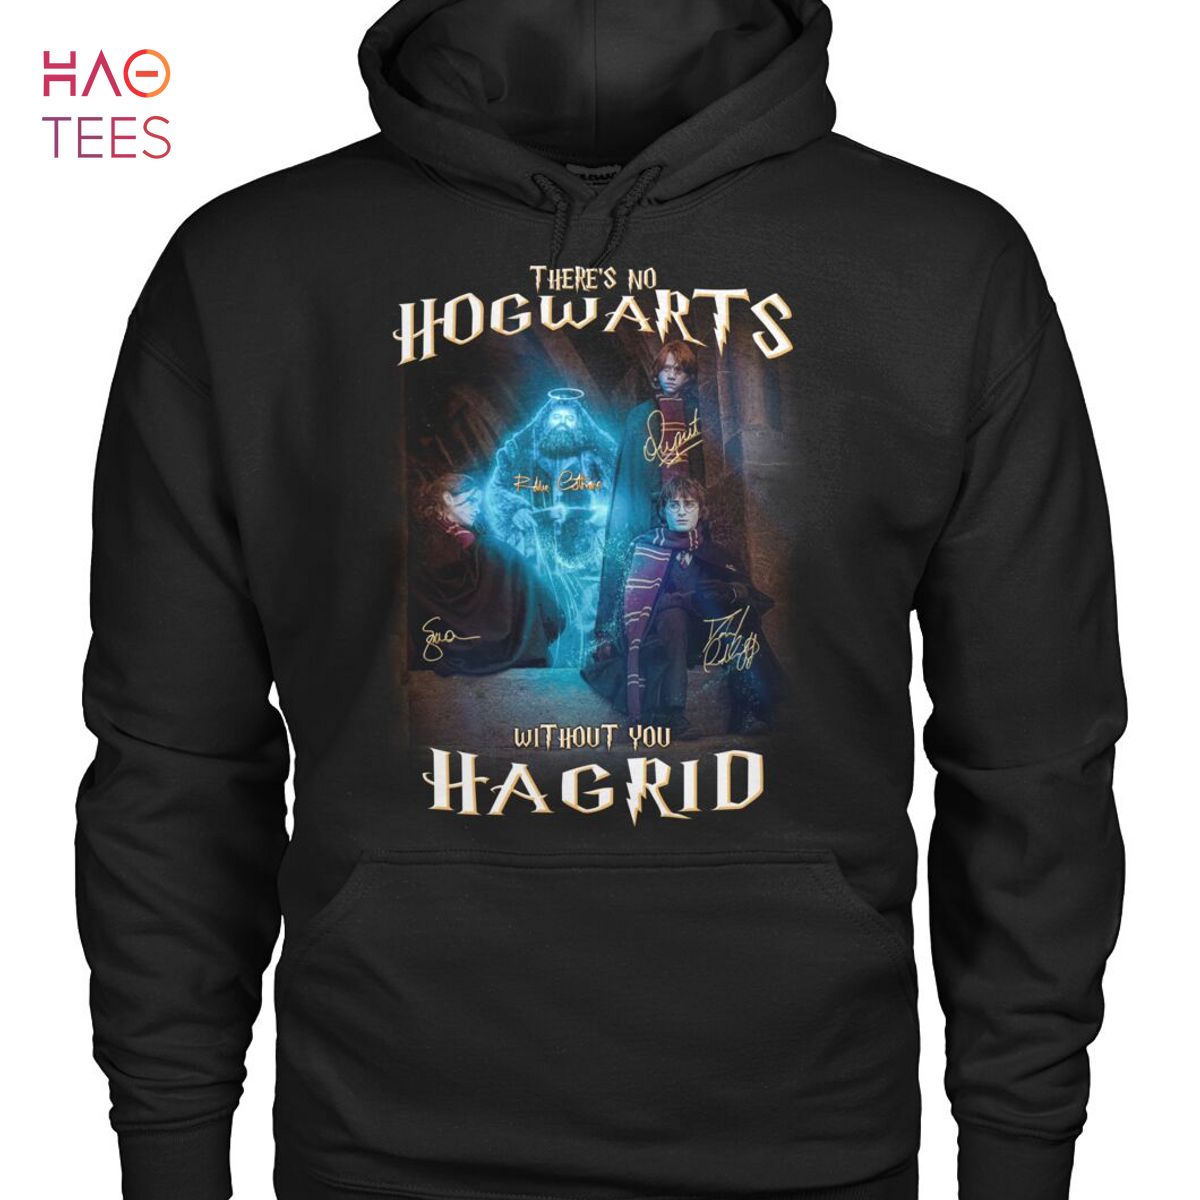 There 'S No Hogwarts Without You Hagrid Shirt